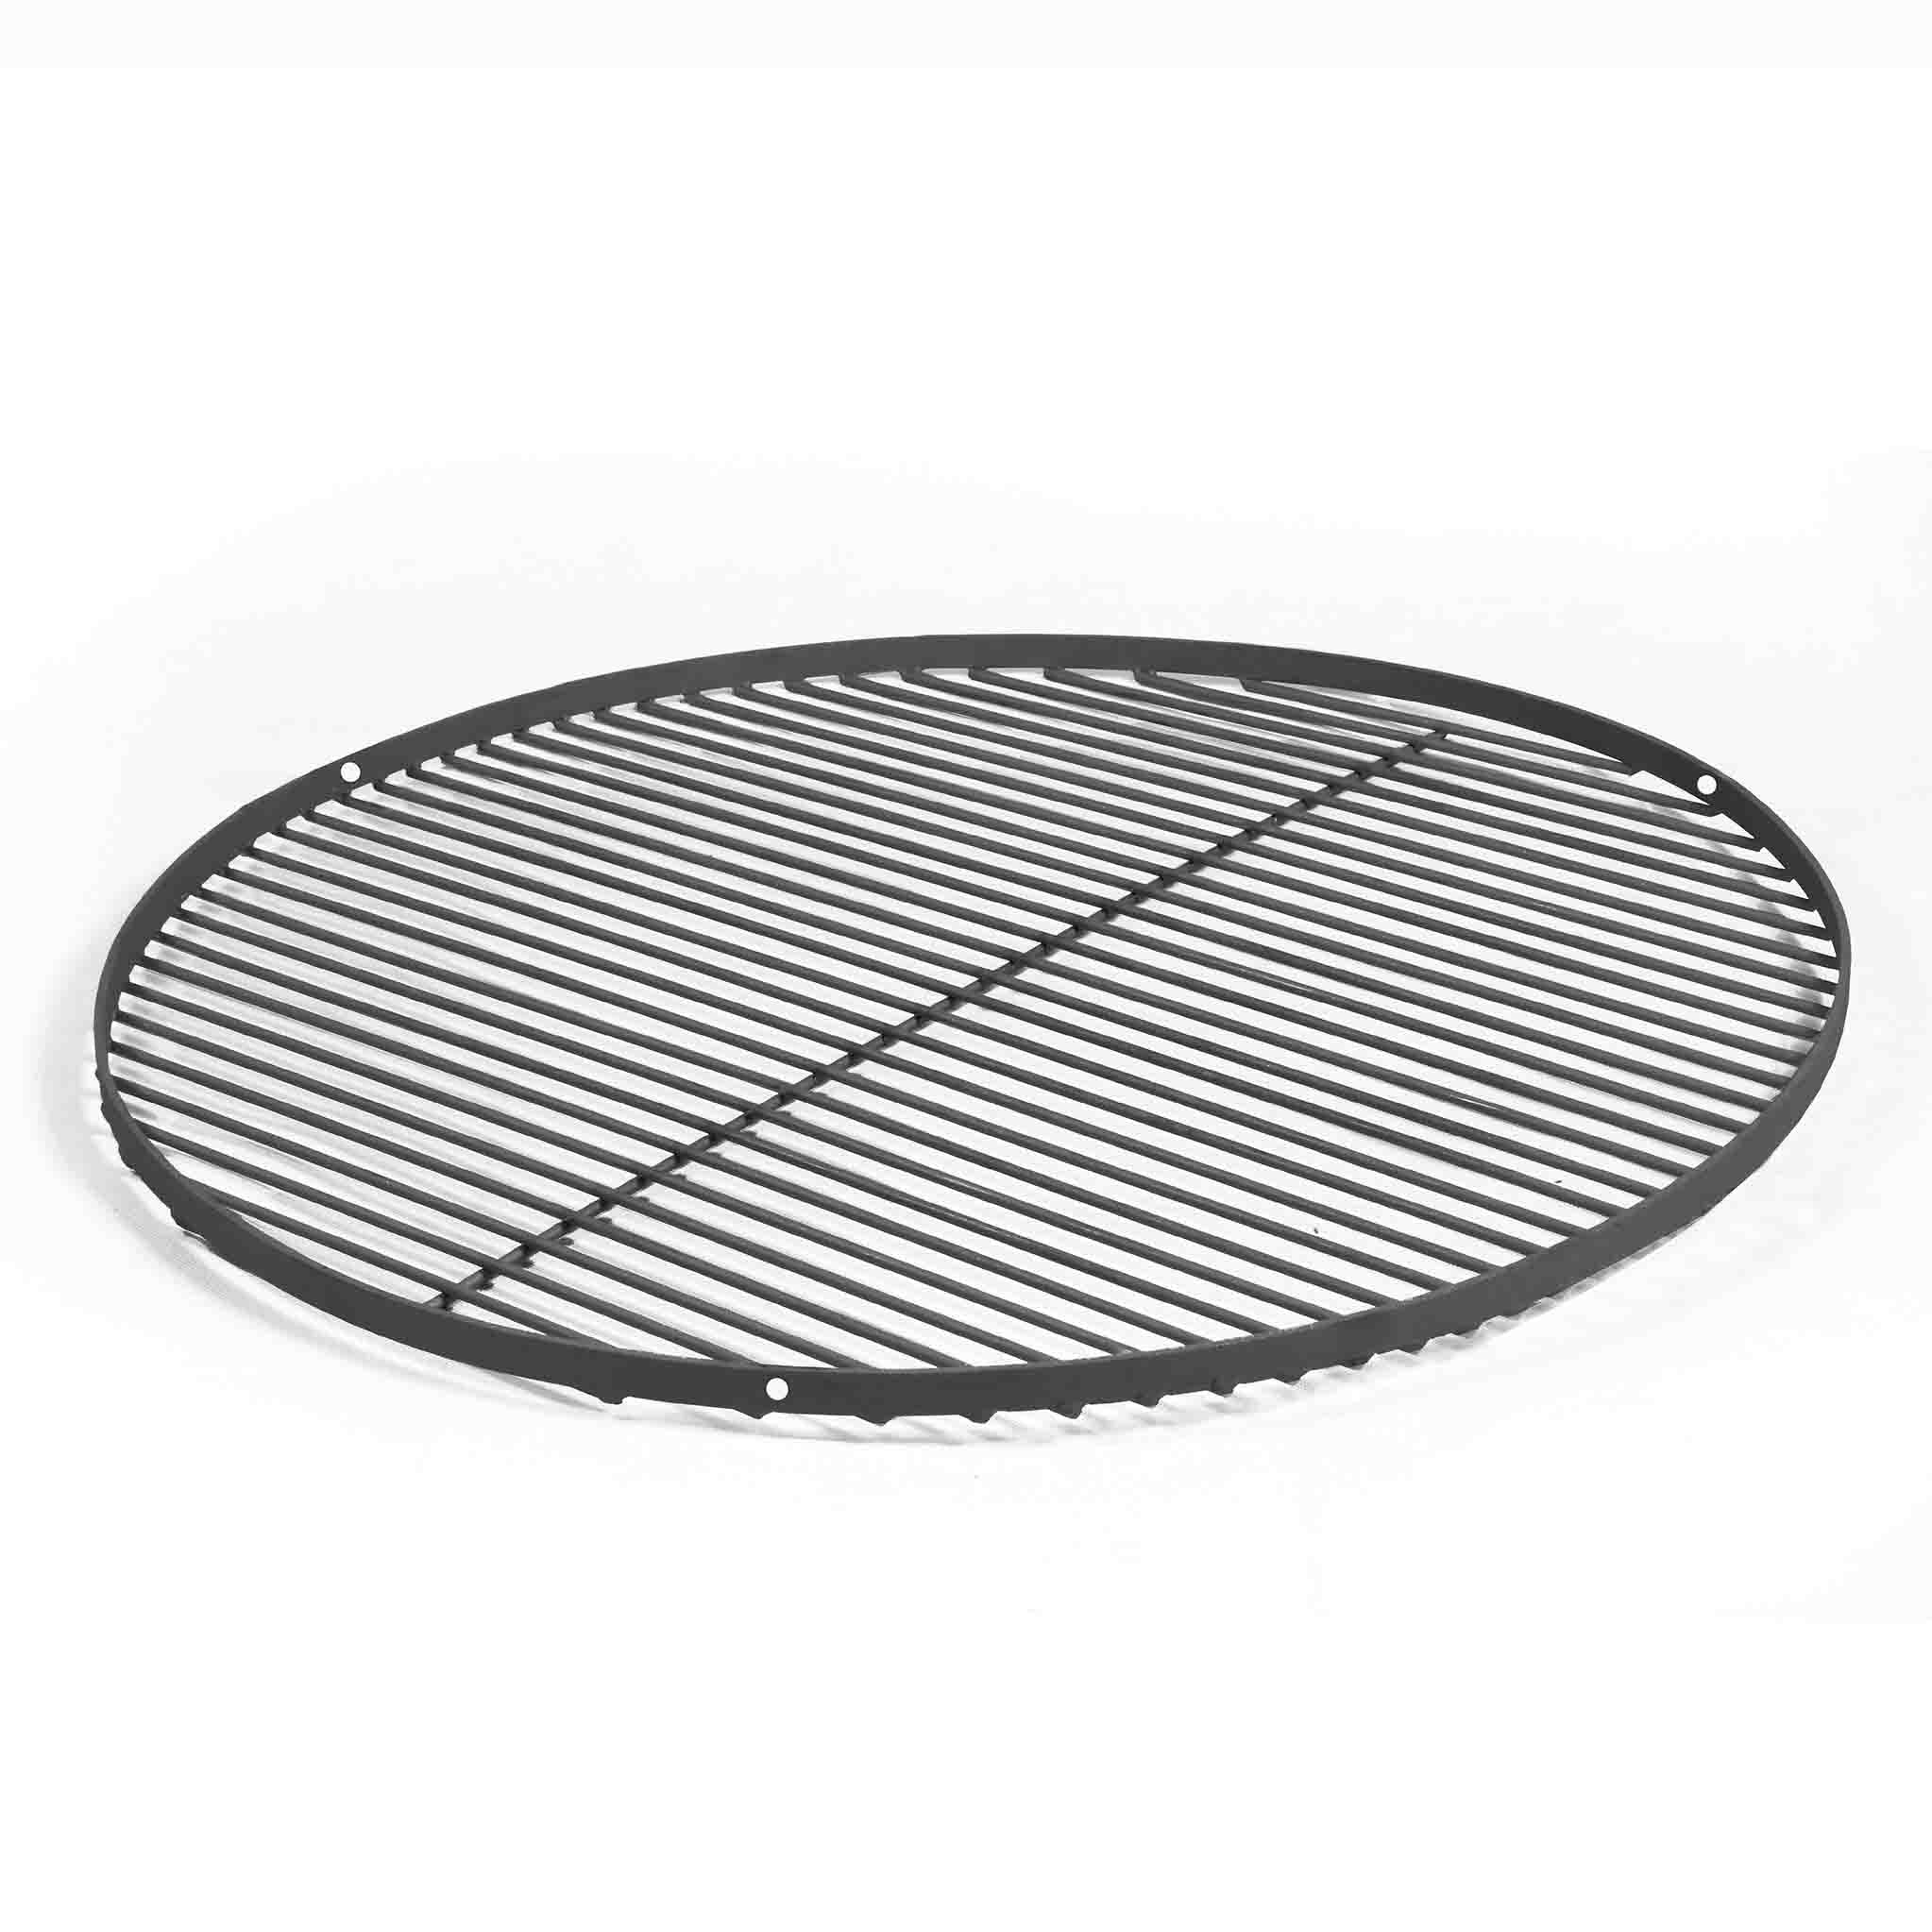 Steel Grate For Fire Pit Bowl Bbq Grill For Garden Patio Barbeque Cooking Outdoor Heating